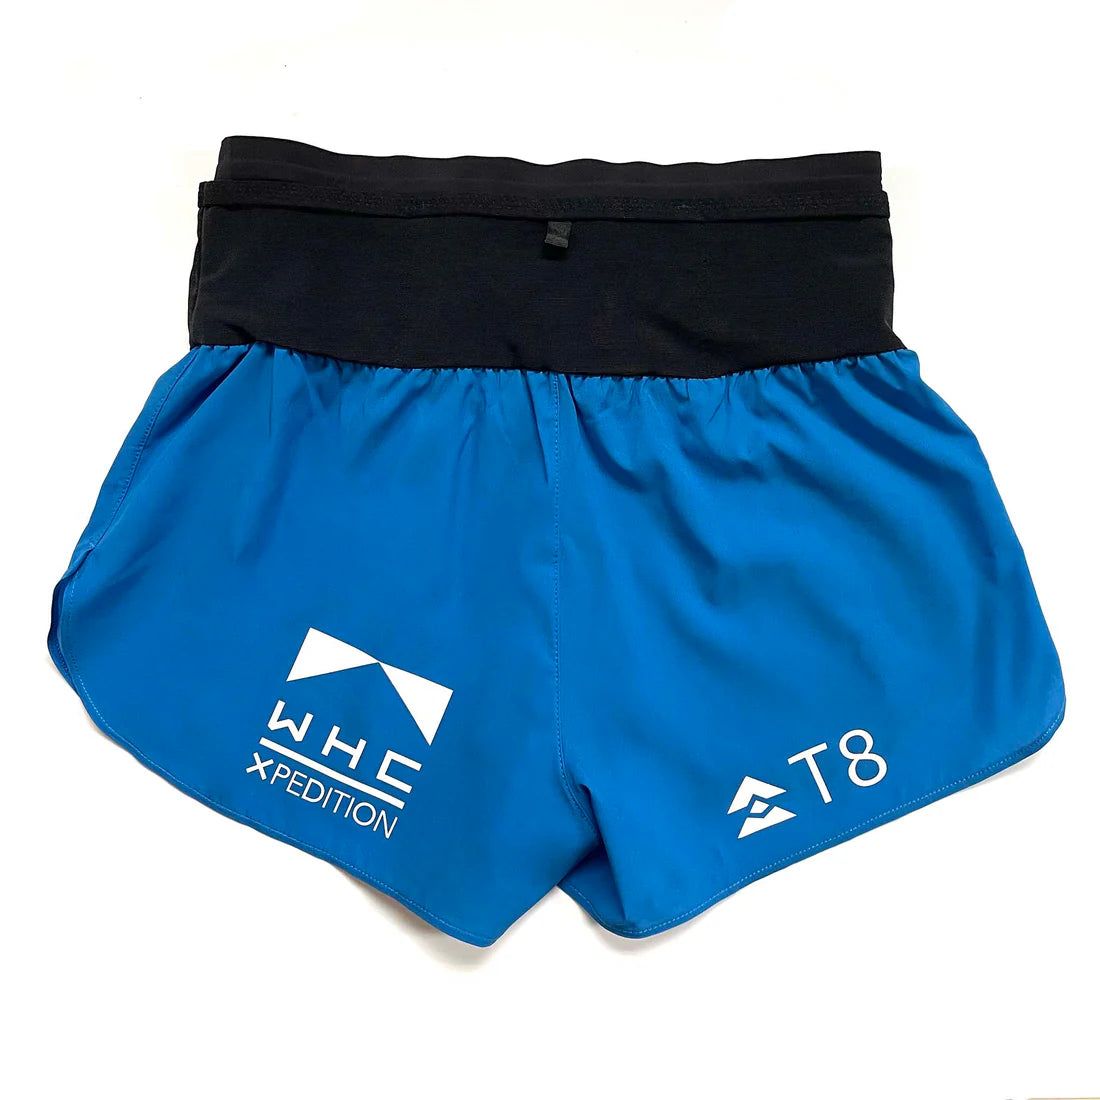 T8 Sherpa Shorts - Women's - WHC Xpedition